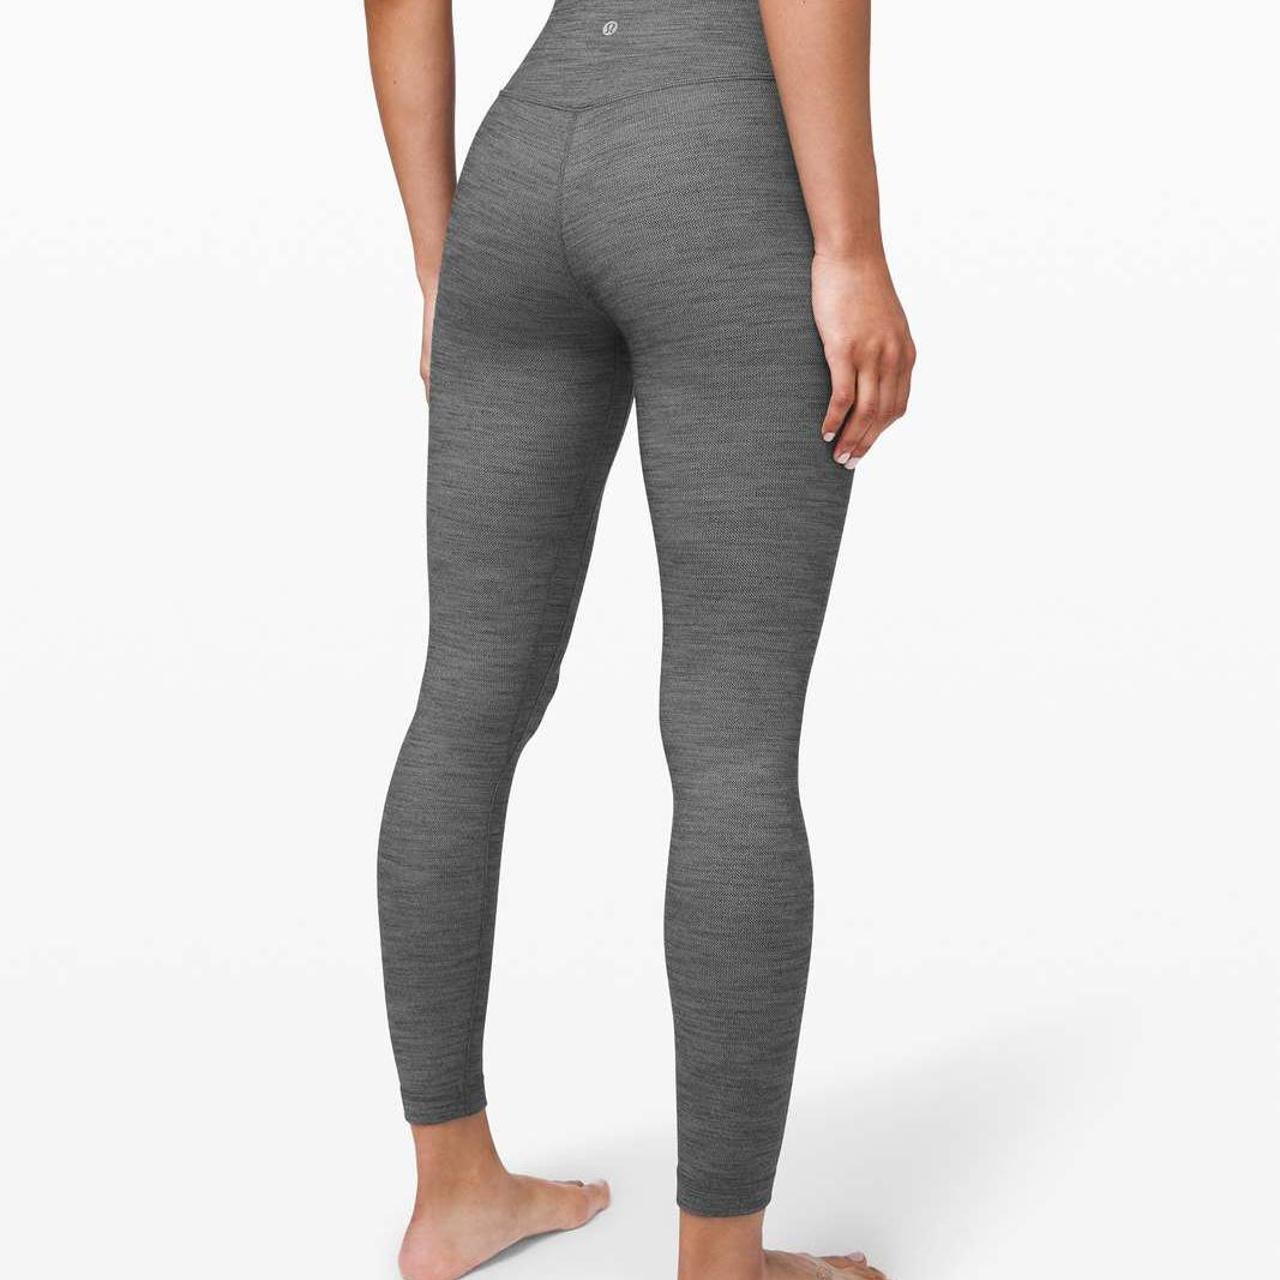 Lululemon Heather Gray Leggings with Mesh Cuts Outs & Zipper